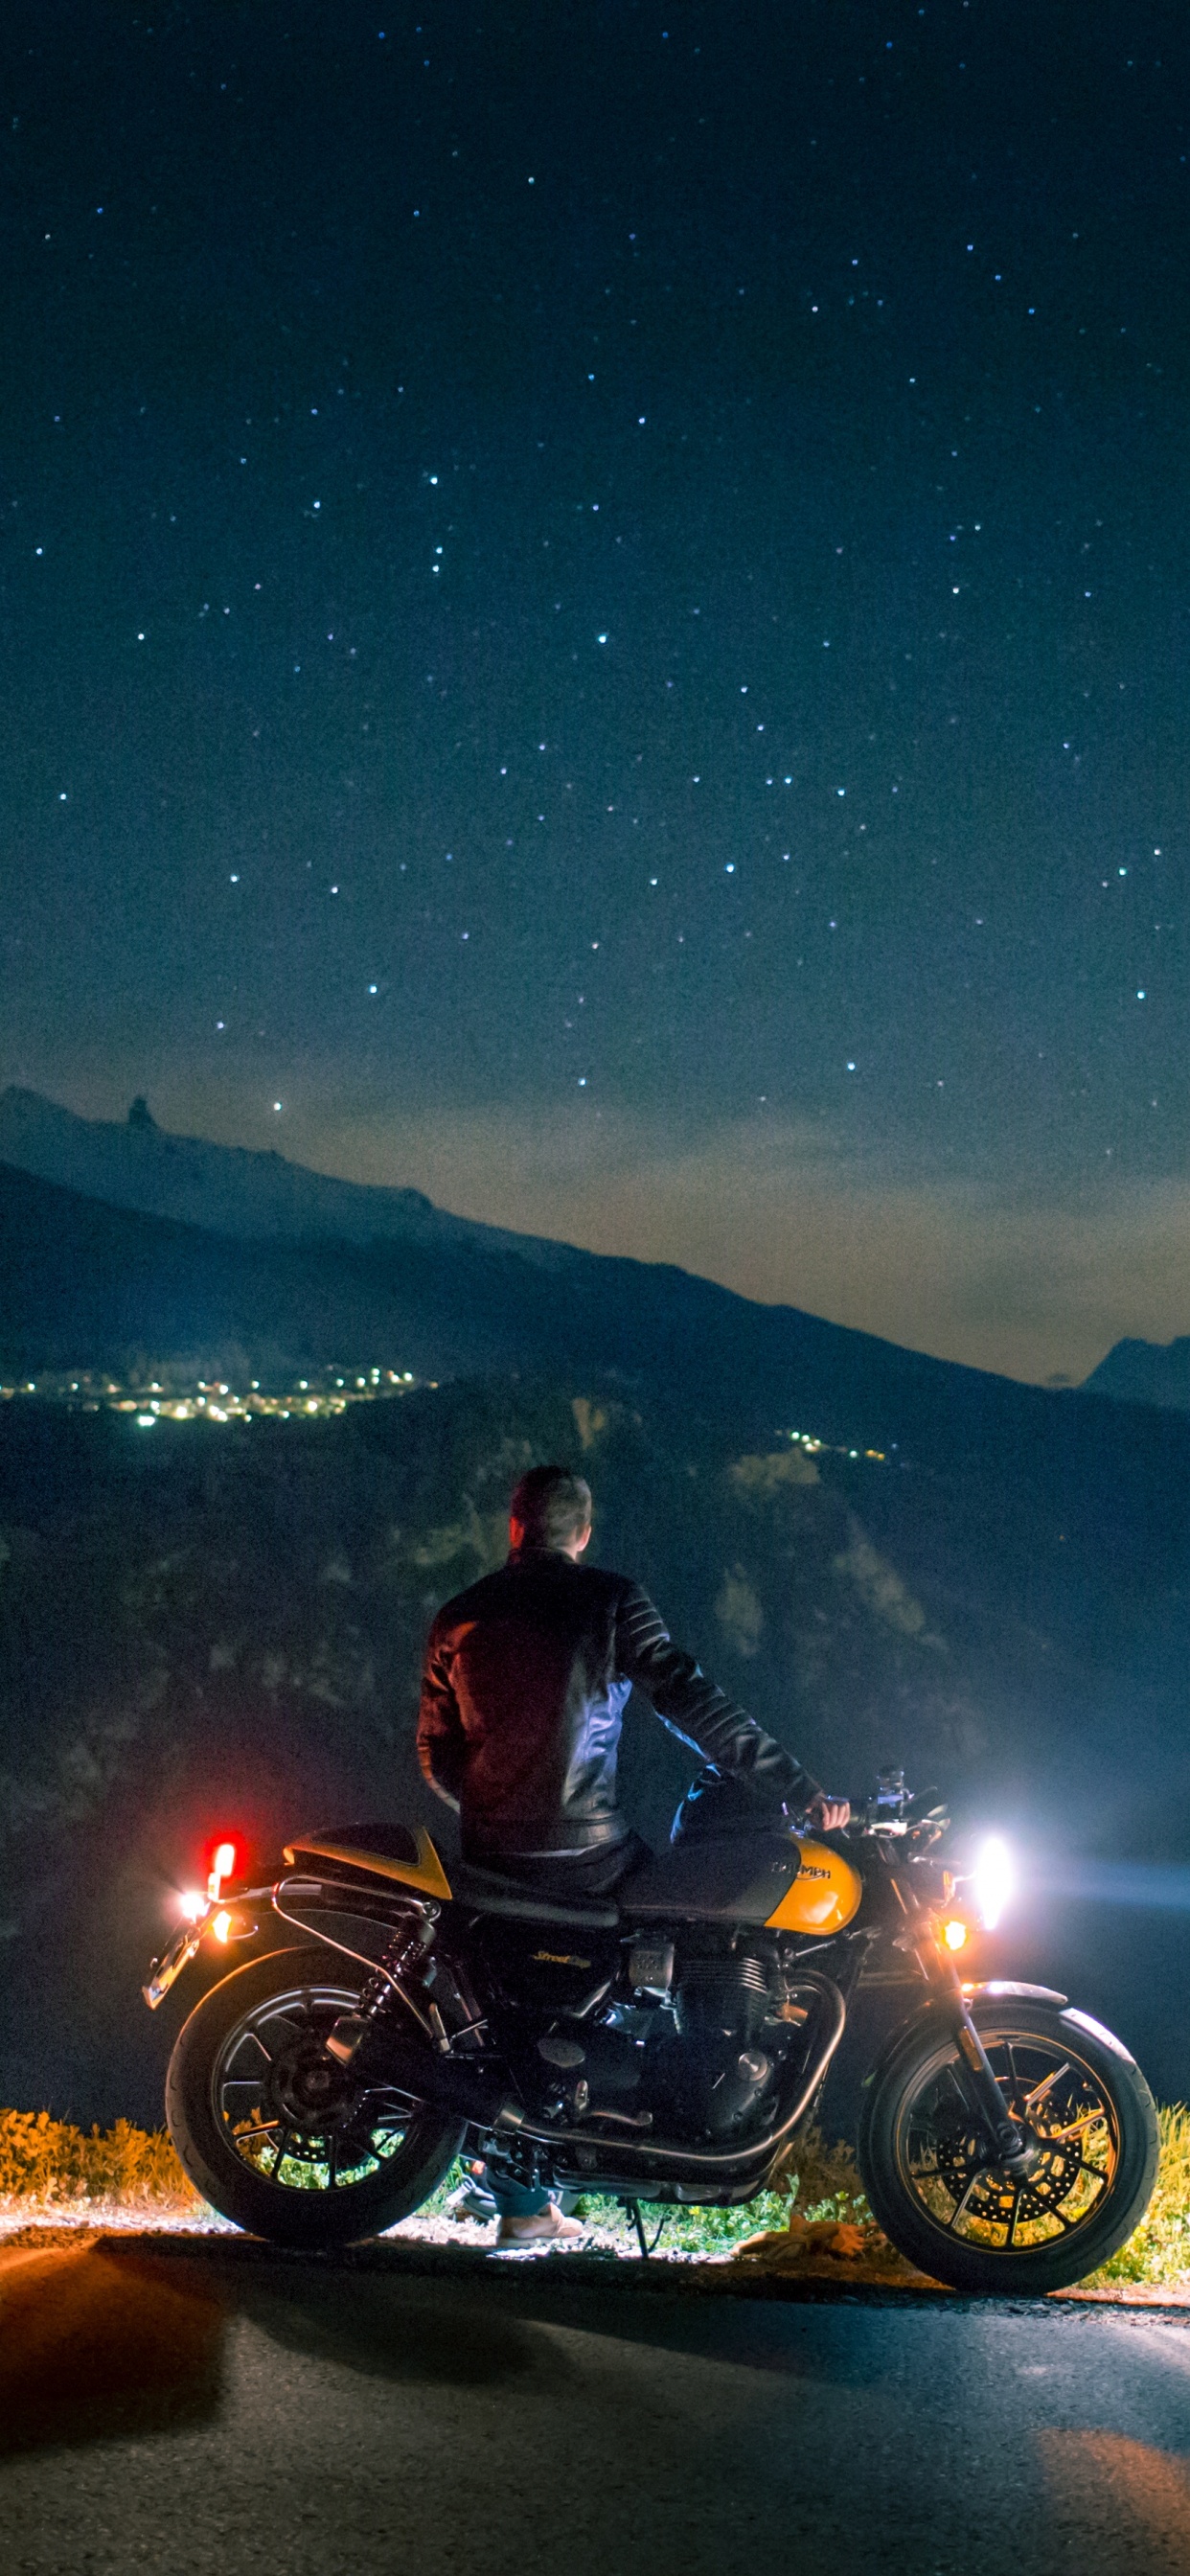 Man Riding Motorcycle on Road During Night Time. Wallpaper in 1242x2688 Resolution